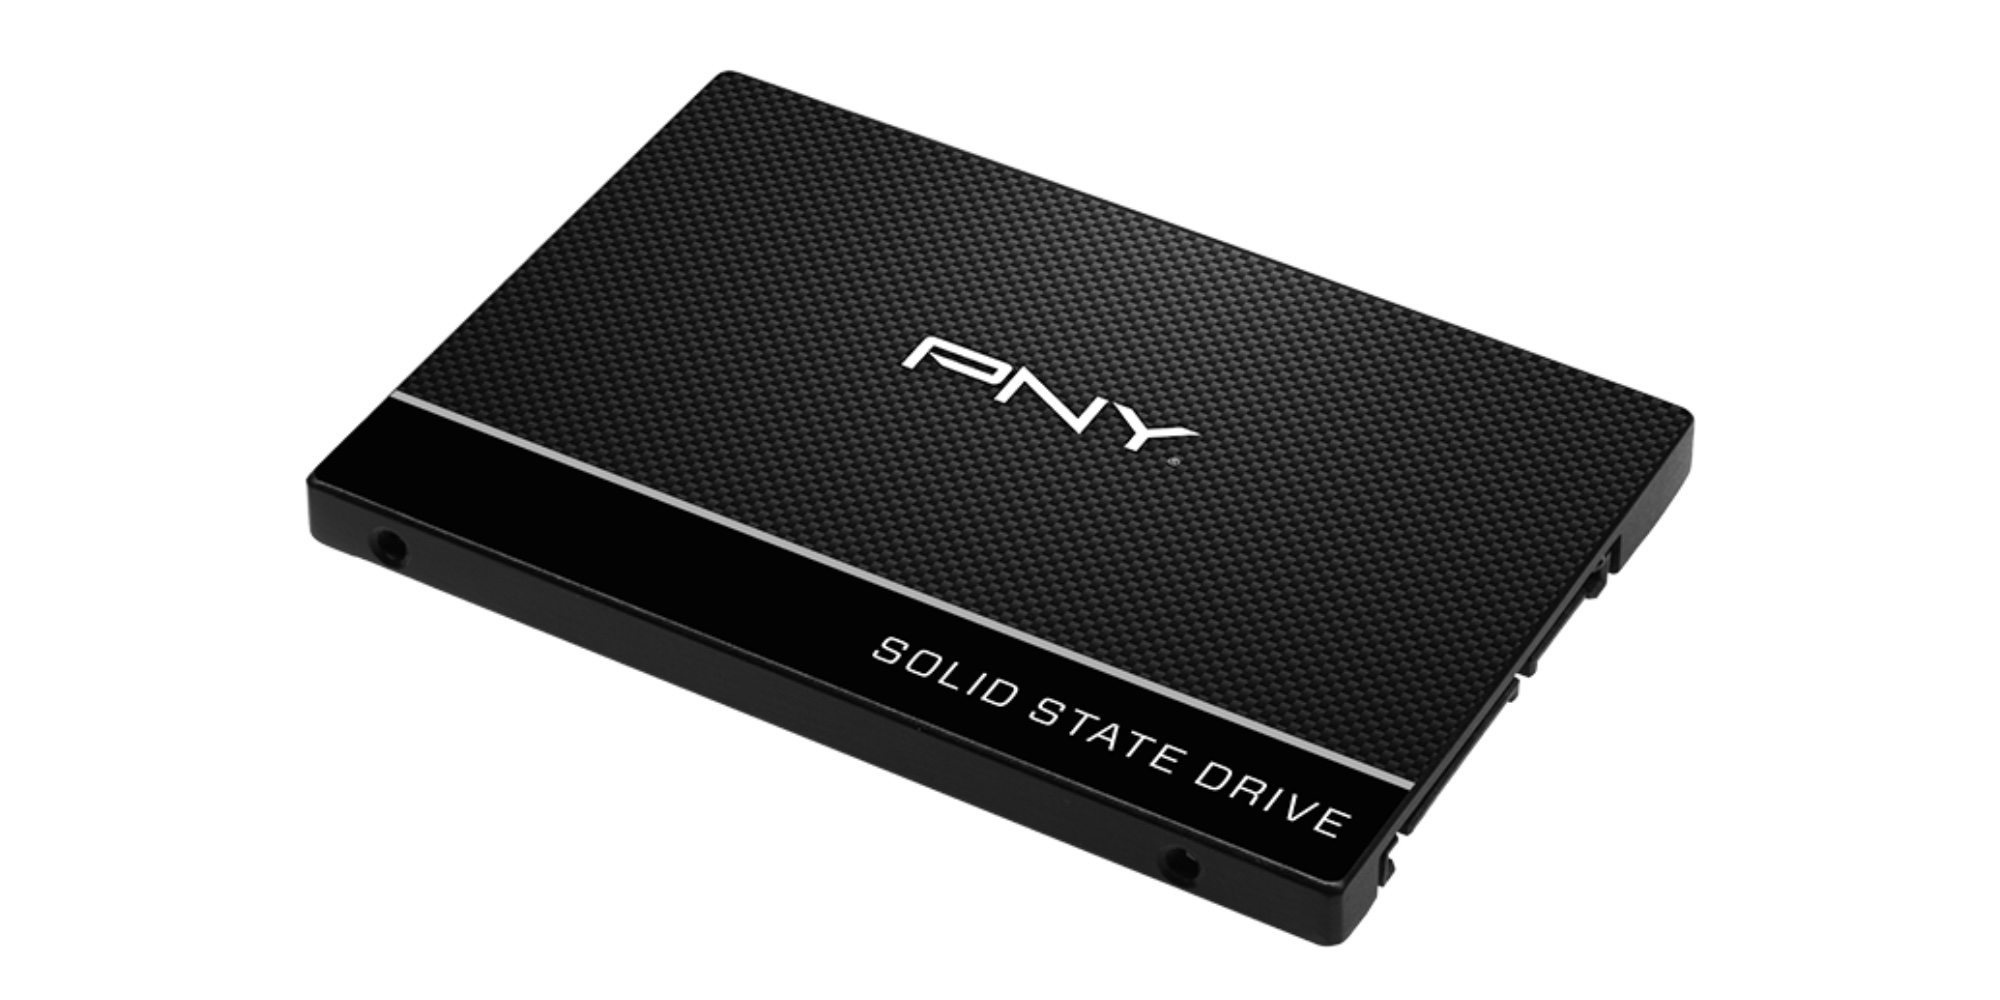 Save 20% on PNY's $20 Prime shipped 120GB SSD and speed up your aging